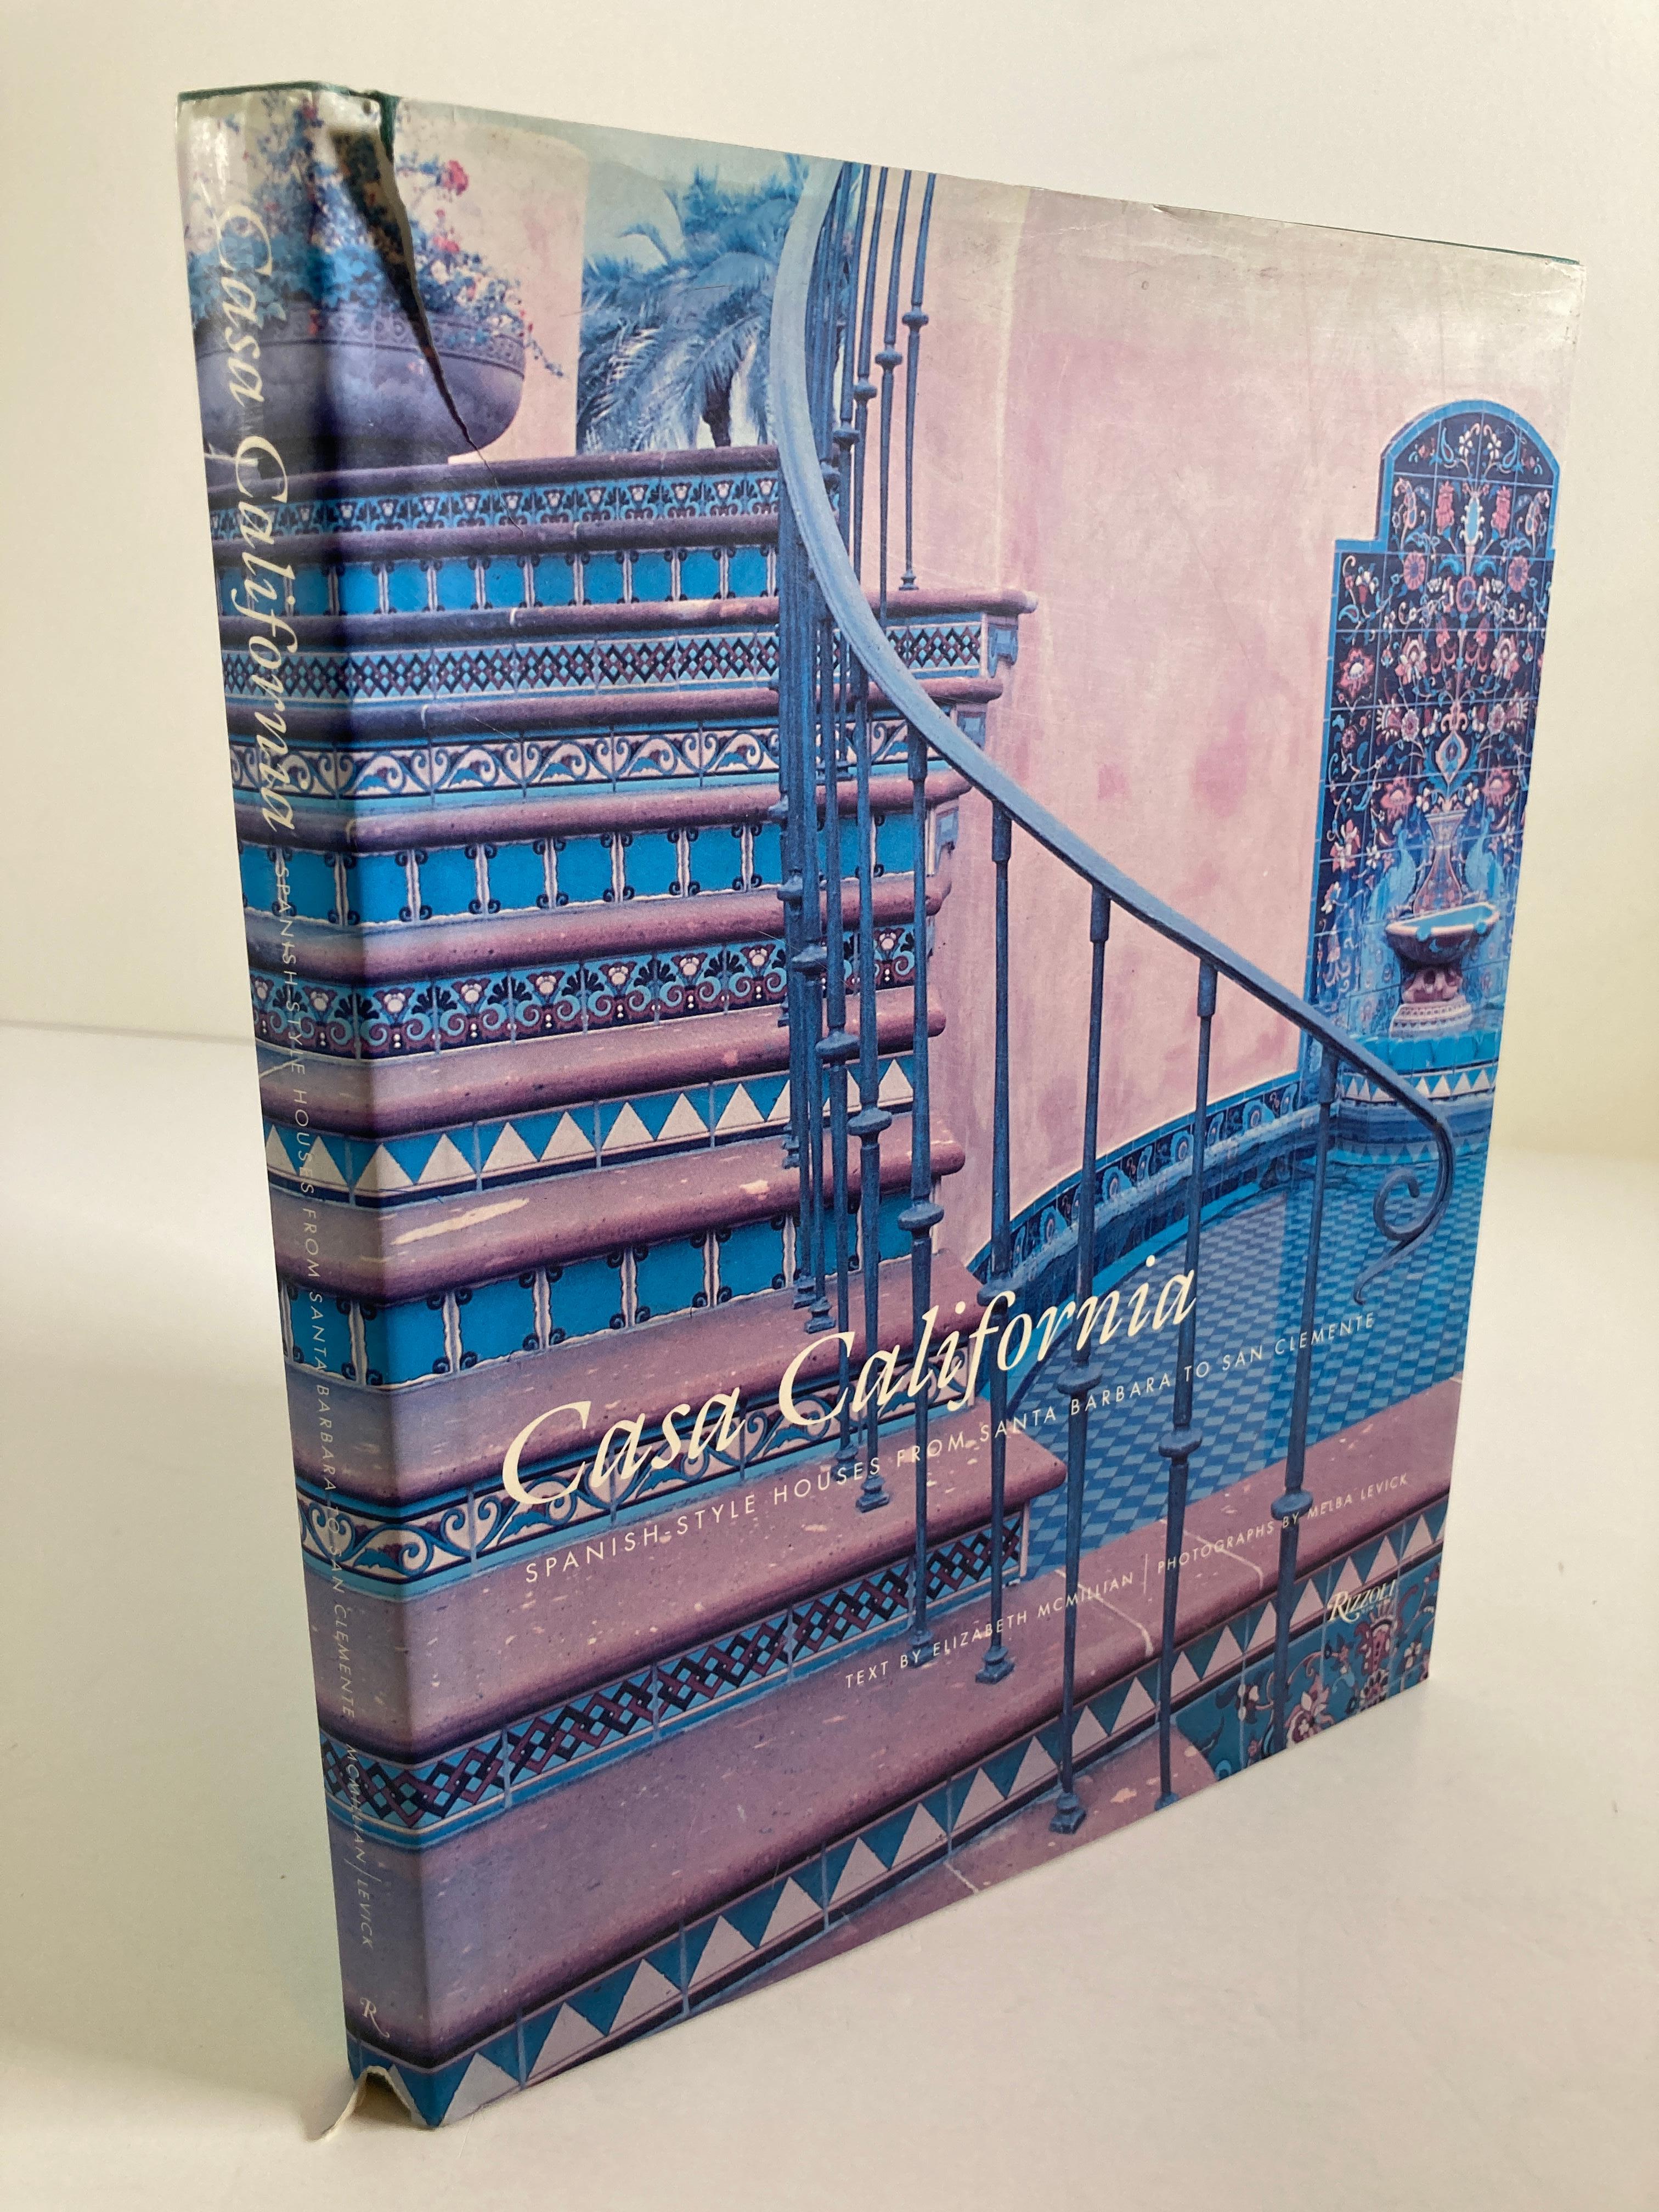 Casa California: Spanish-Style Houses from Santa Barbara to San Clemente.
Mcmillian, Elizabeth.
The Spanish-style architecture of Southern California's seaside estates, canyon villas, and courtyard bungalows is central to its romantic image, one